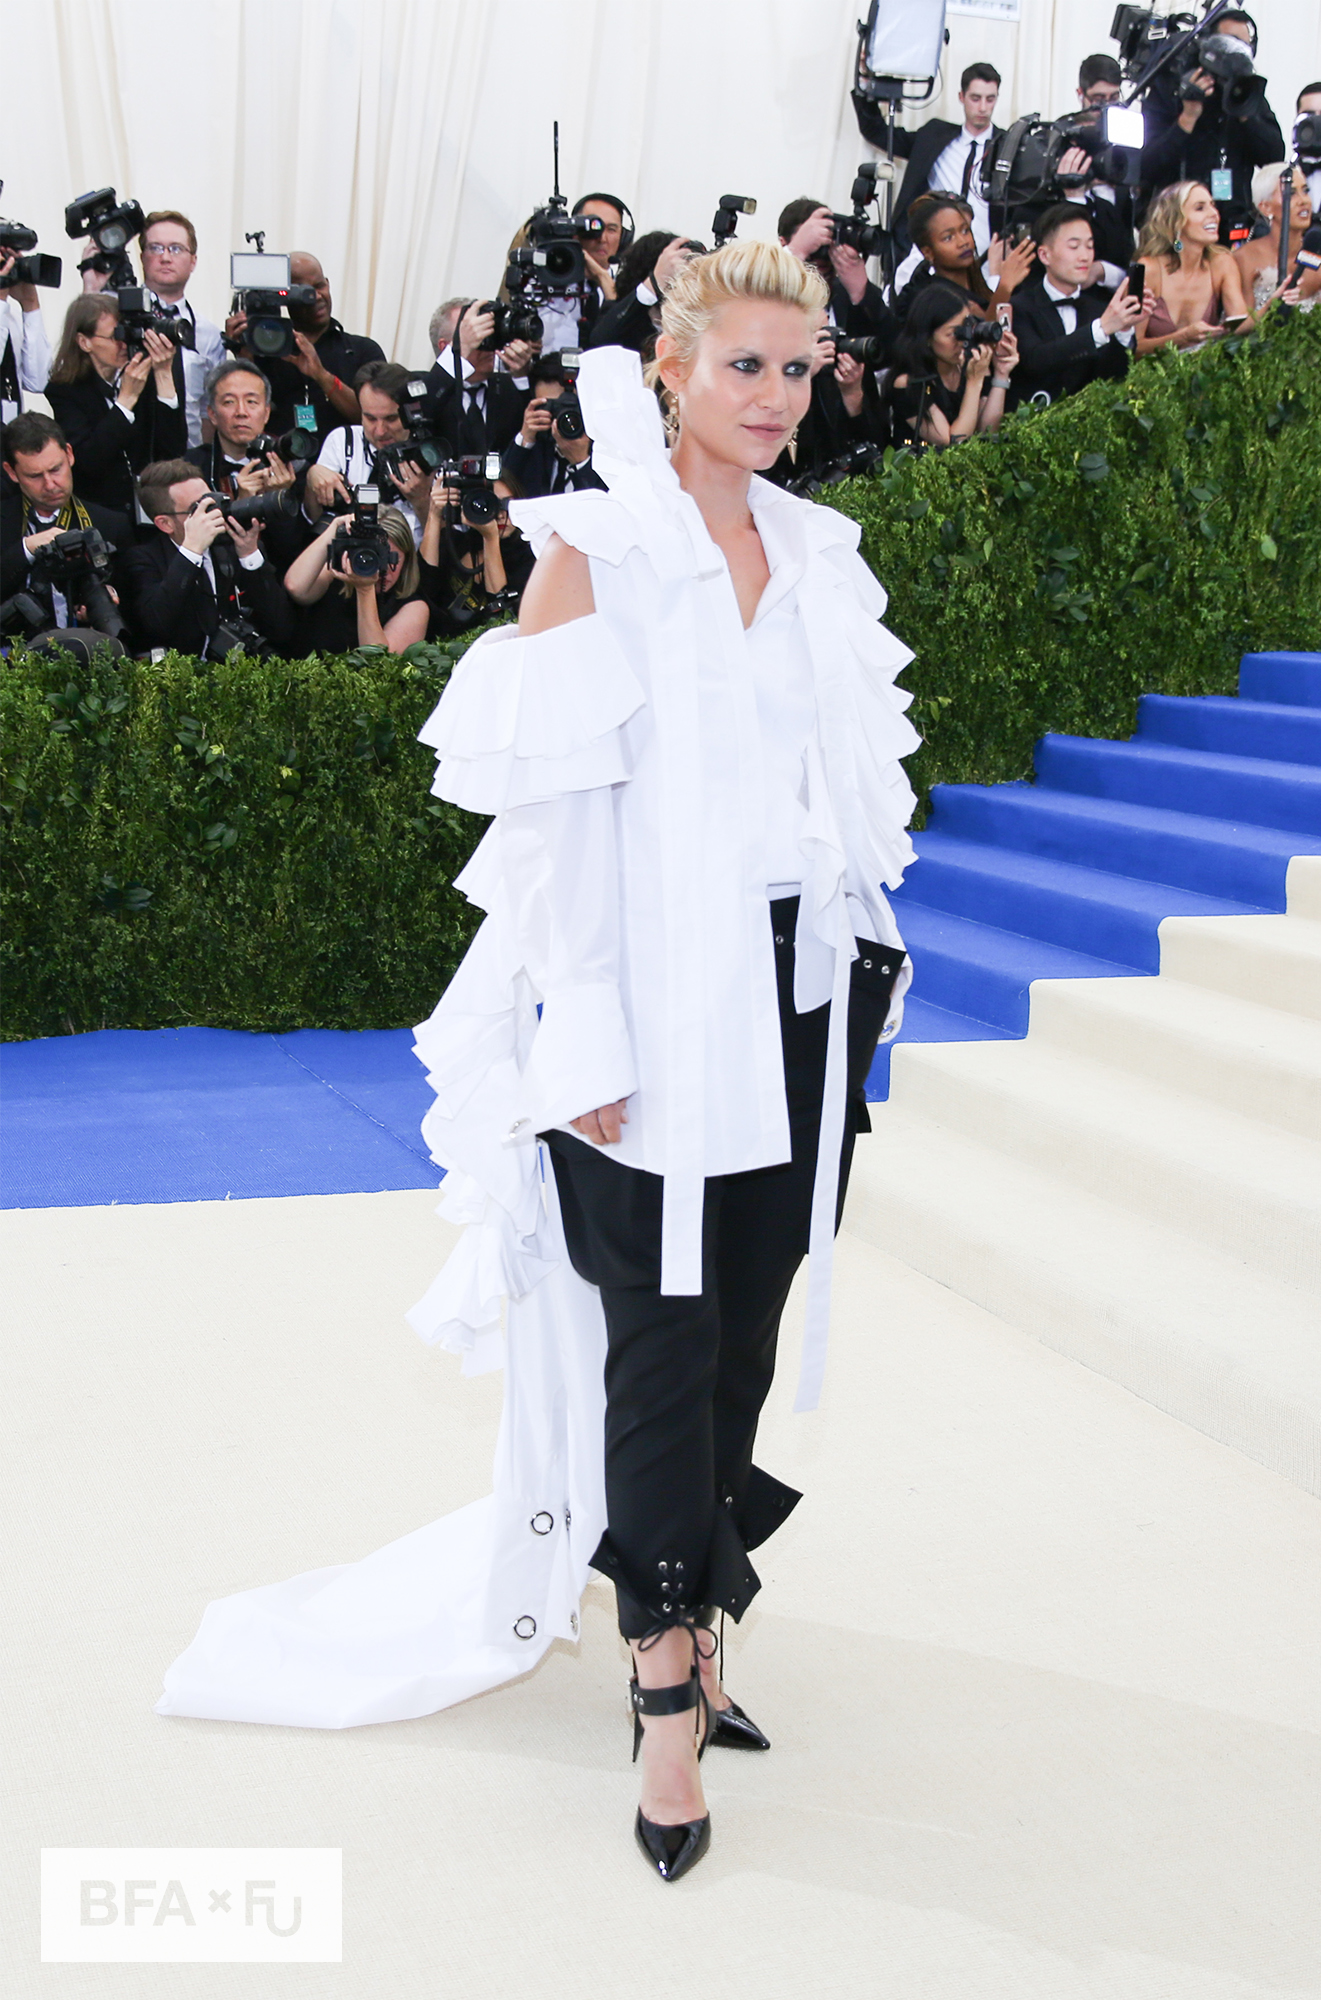 The 25 Most Interesting Looks From the Met Gala - Fashion Unfiltered